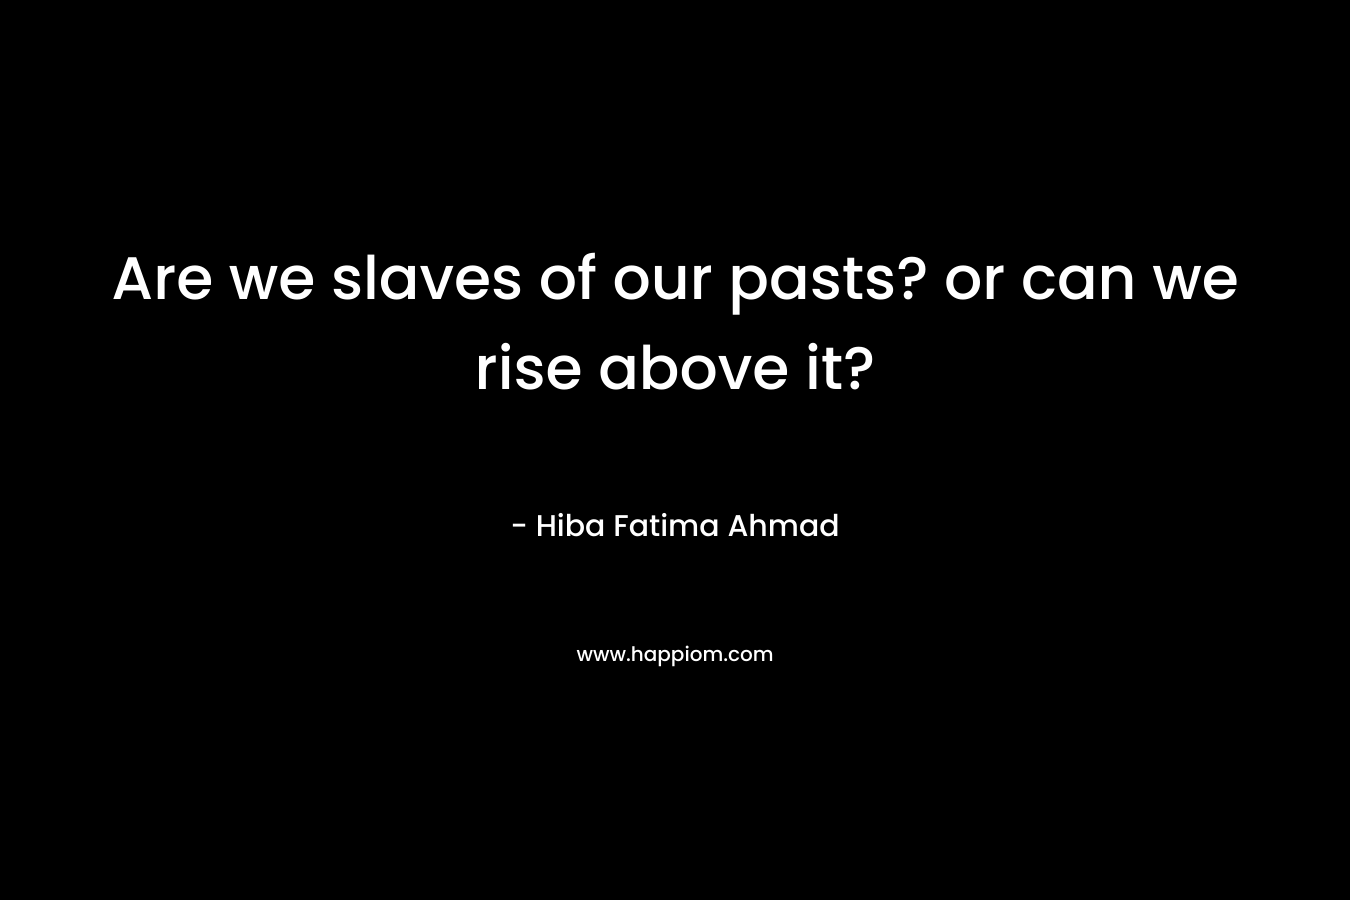 Are we slaves of our pasts? or can we rise above it? – Hiba Fatima Ahmad